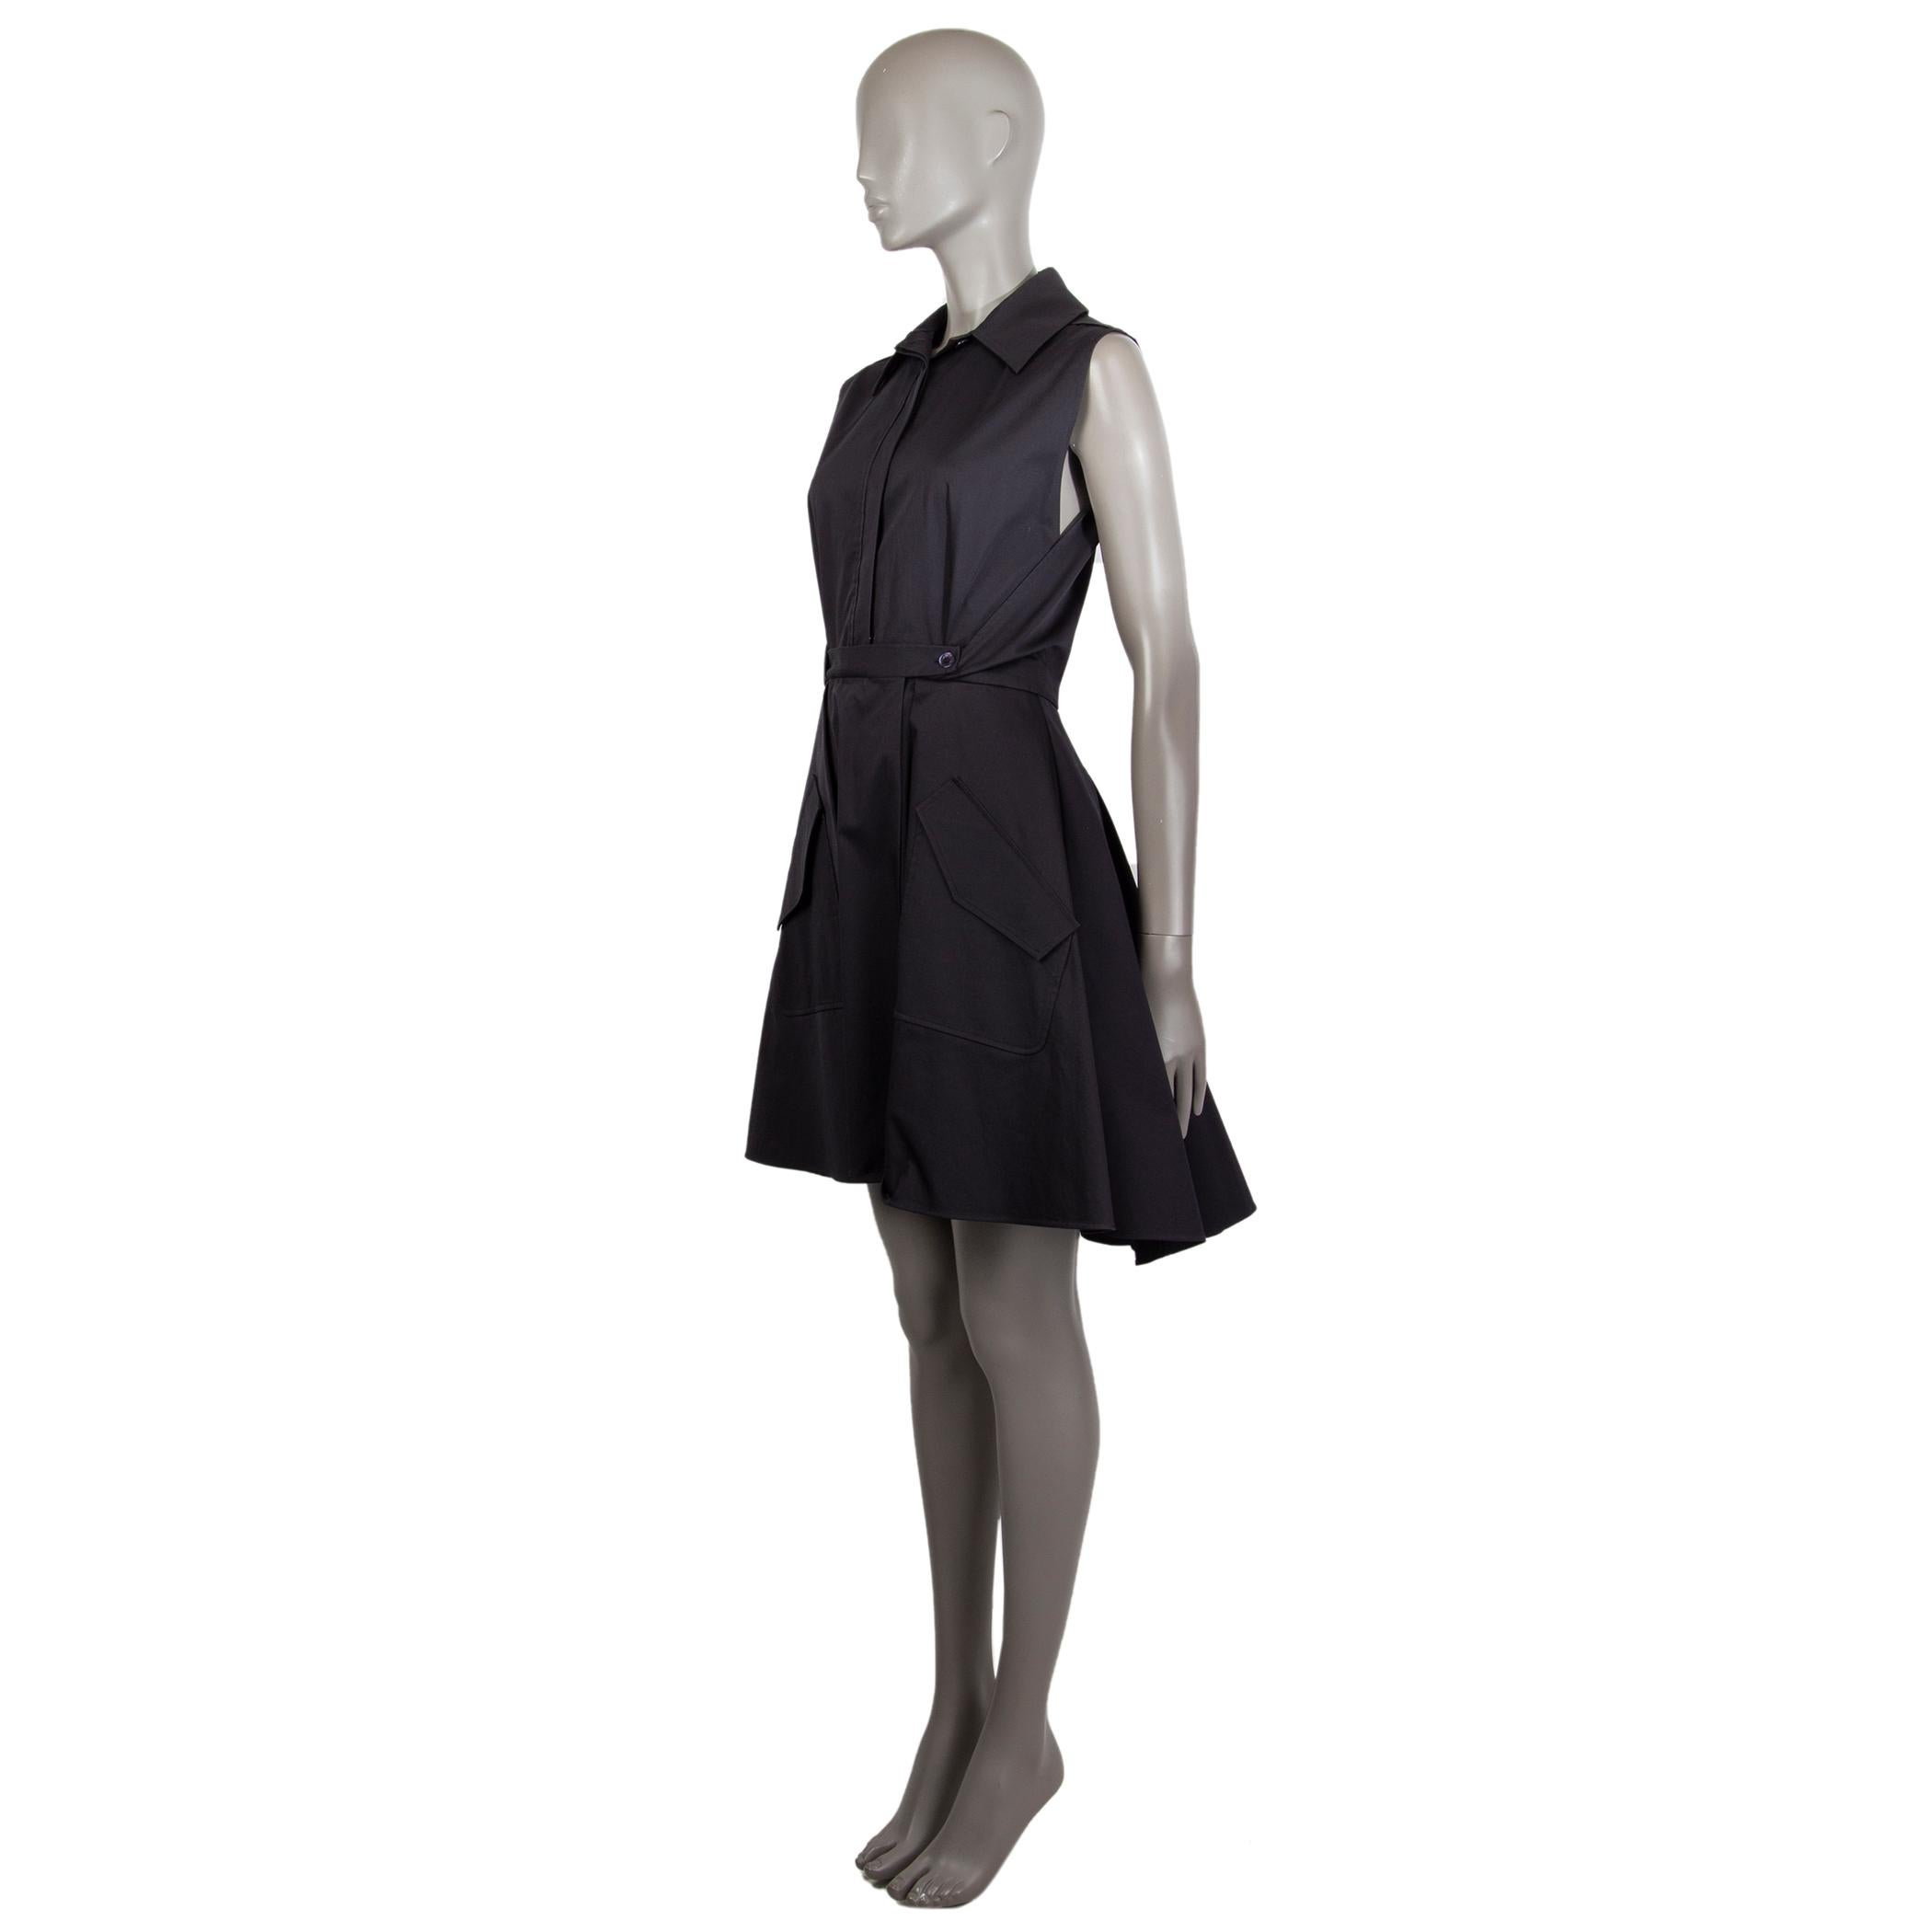 Christian Dior sleeveless draped shirt dress in midnight blue cotton blend (assumed as tag is missing) with a flat collar. Has two deep asymmetrical pockets on the front. Its built-in skirt buttons around the inside. Closes fully on the front with